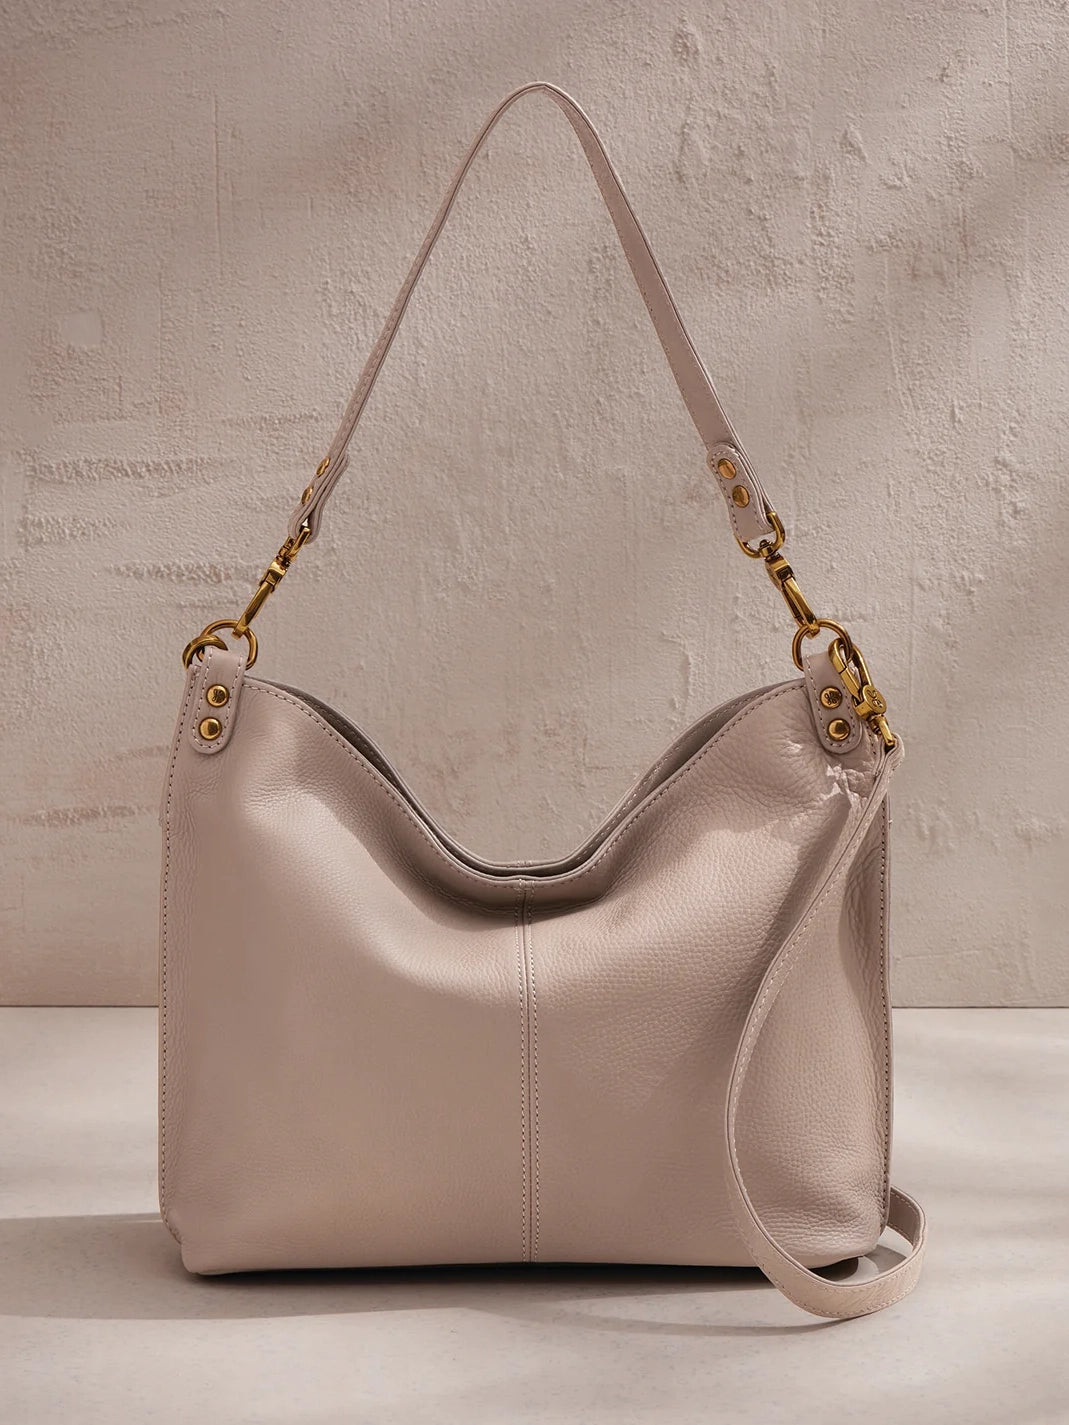 hobo pier shoulder bag in taupe-front view 2